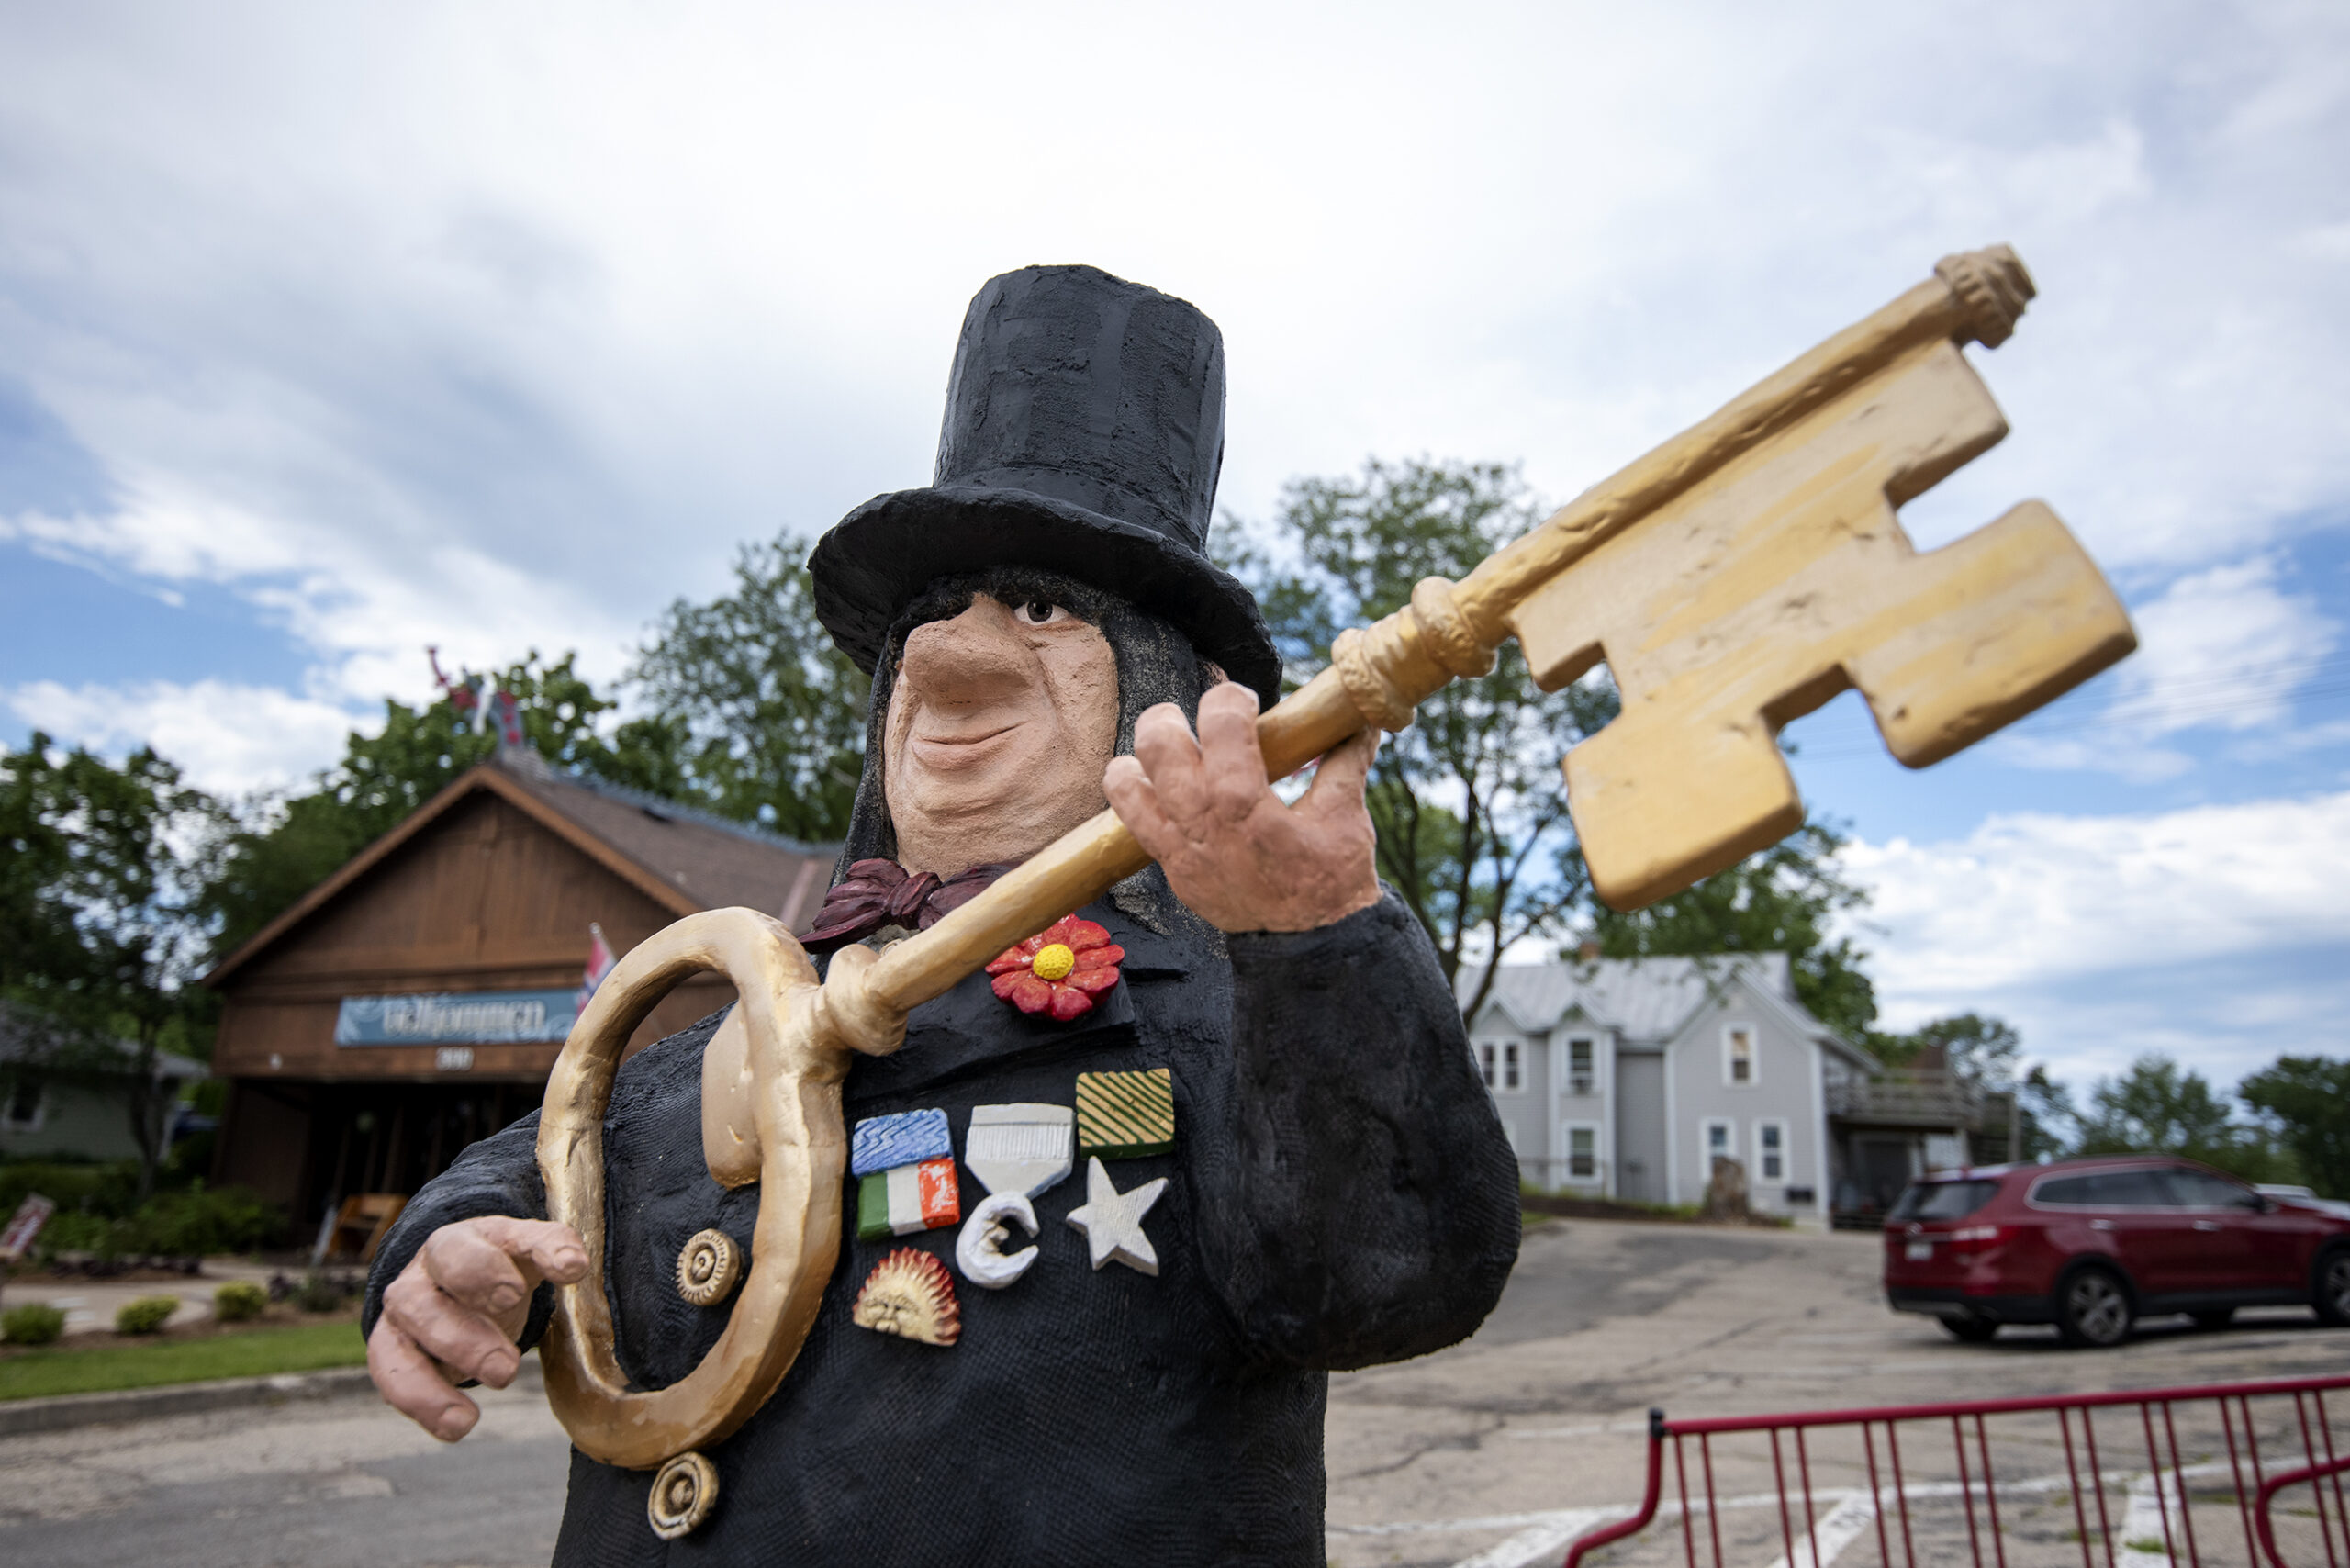 A statue shows a troll in a top hat holding a large golden key.